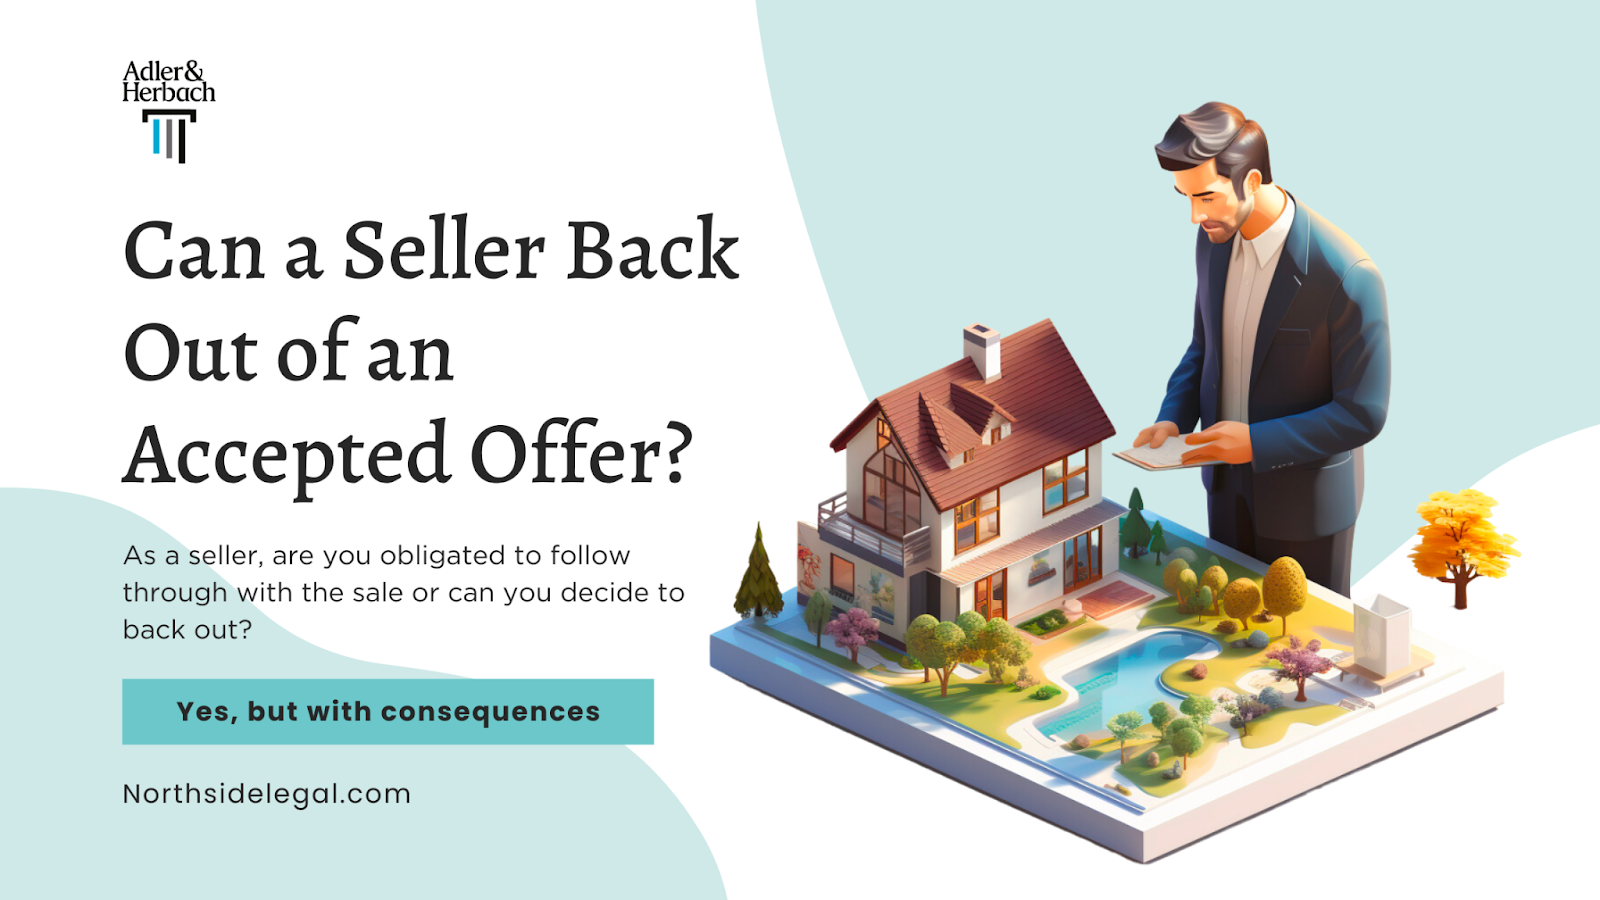 Can a Seller Back Out of an Accepted Offer in Illinois?